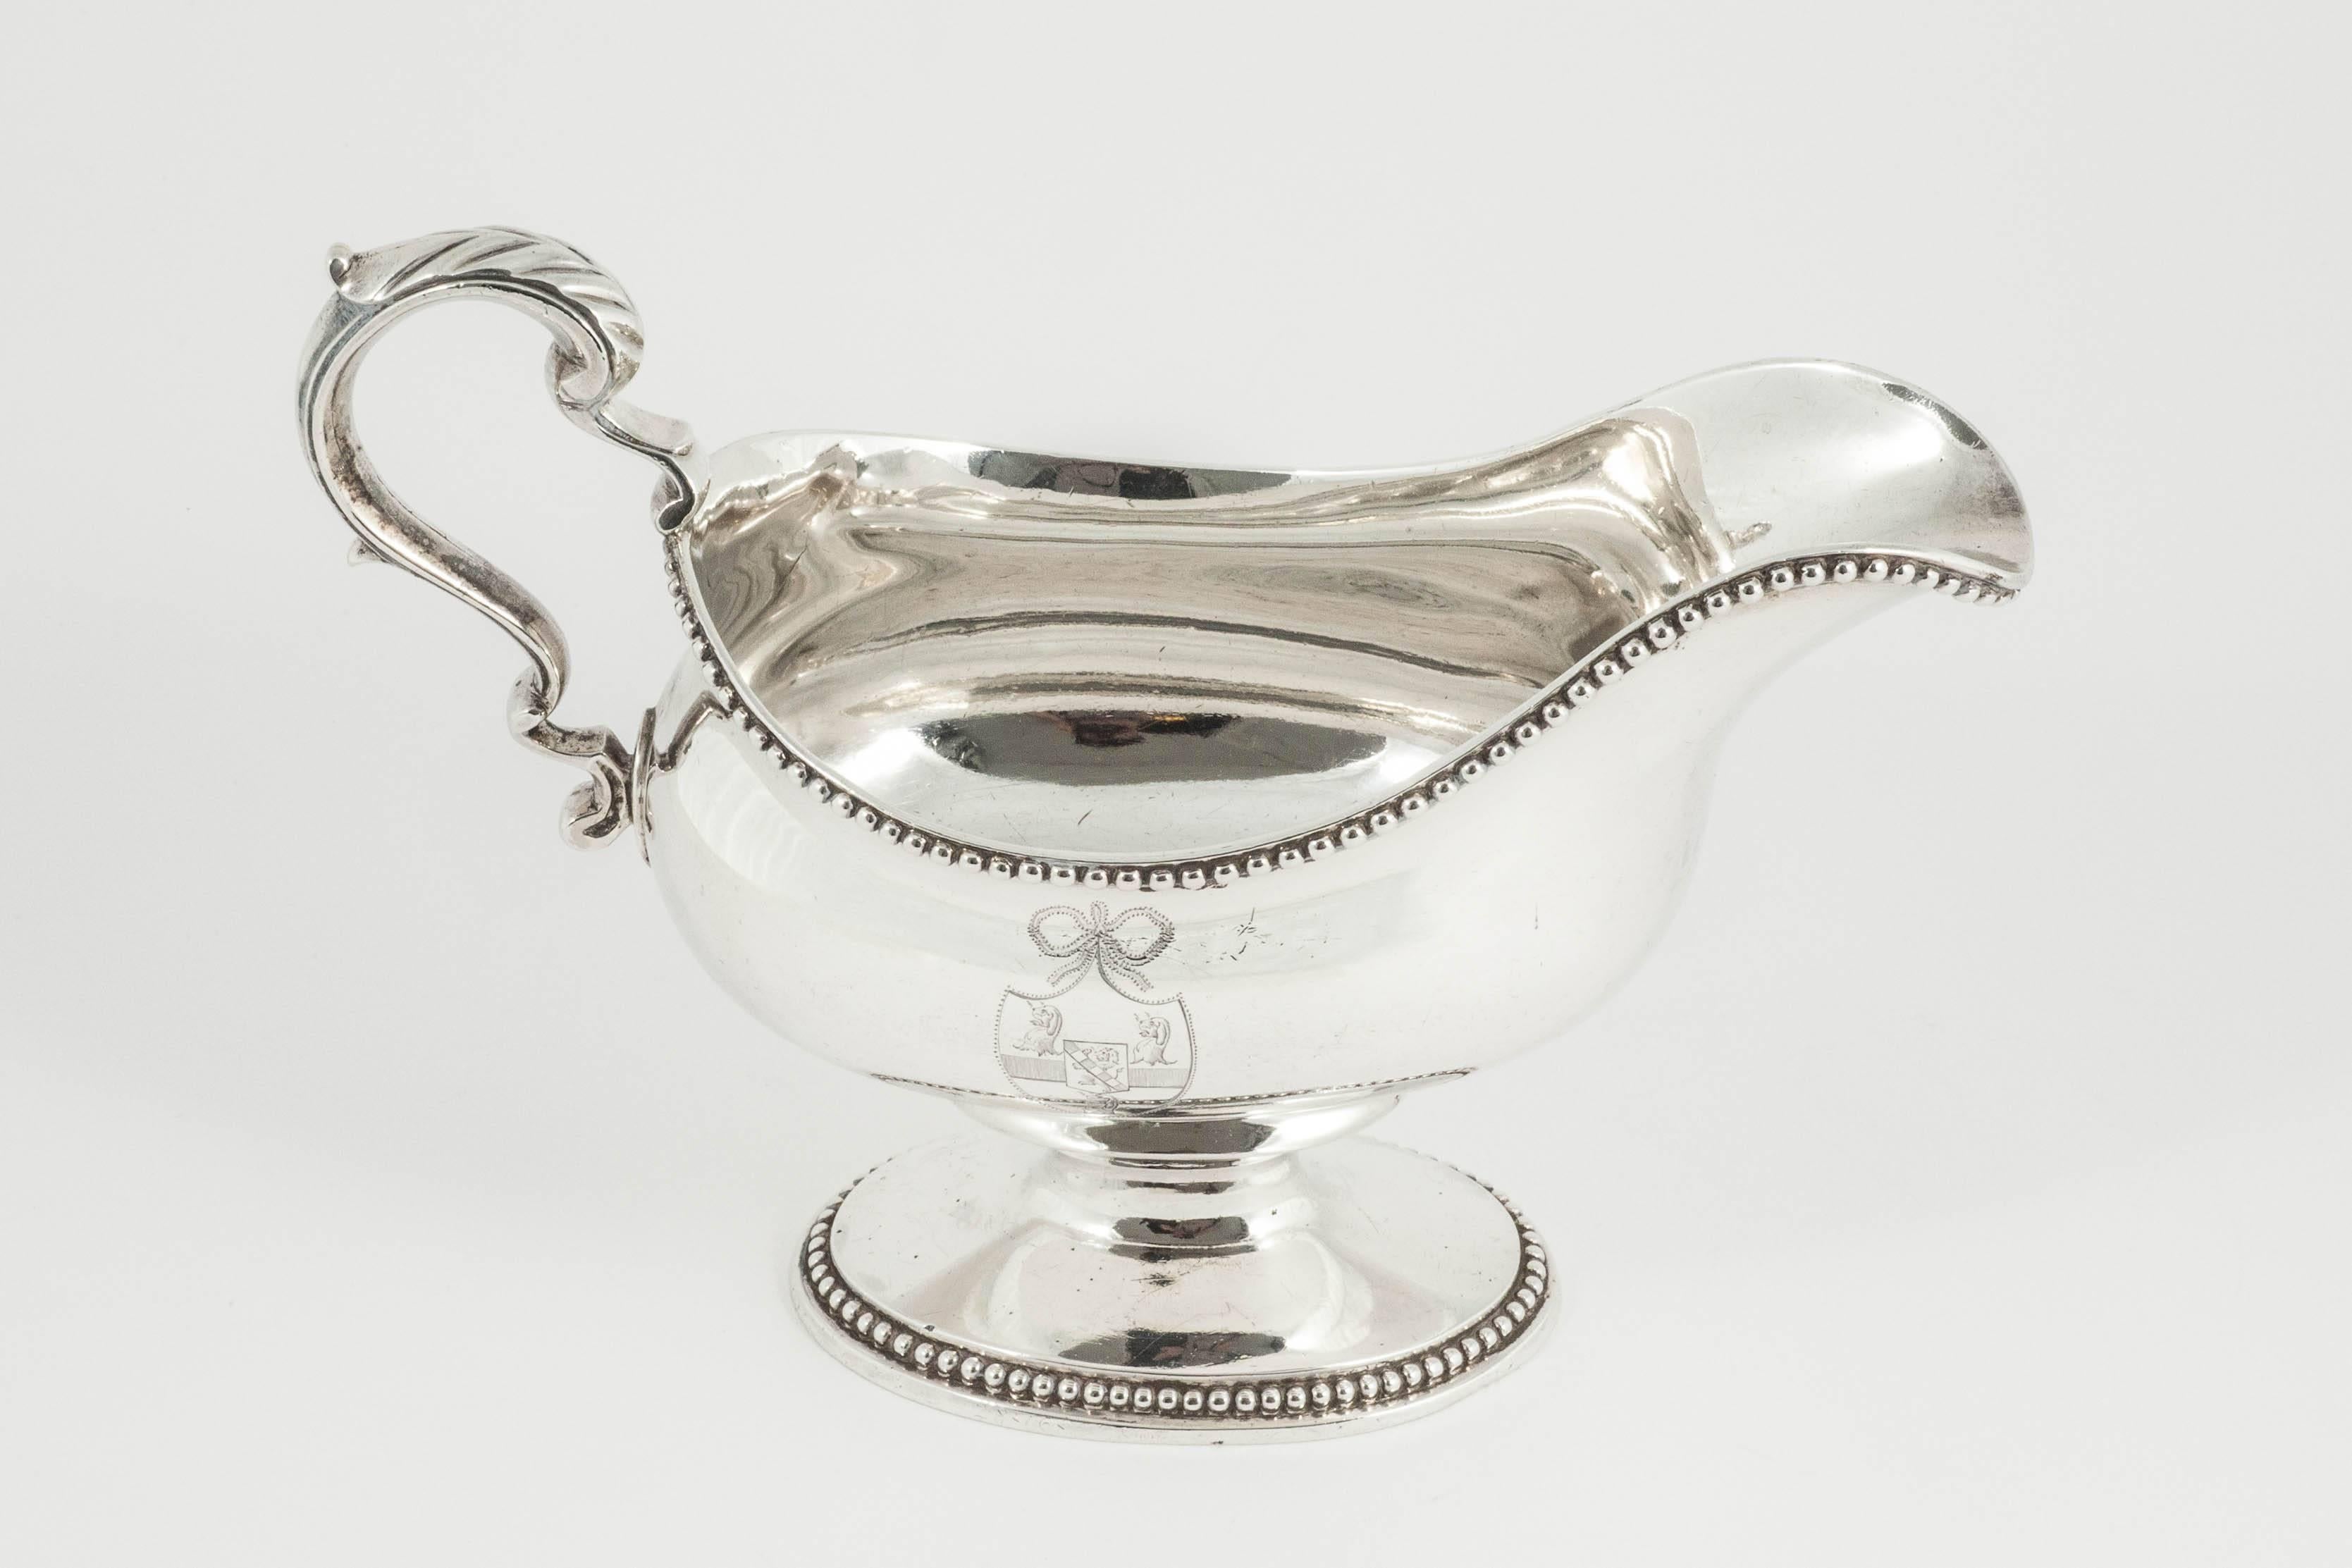 A superb pair of heavy quality sterling silver Georgian sauce boats or gravy boats with bead pattern mounts. Each boat is on a cast oval foot which gives a wonderful substantial feel to these pieces, and the bellied bodies are engraved on one side